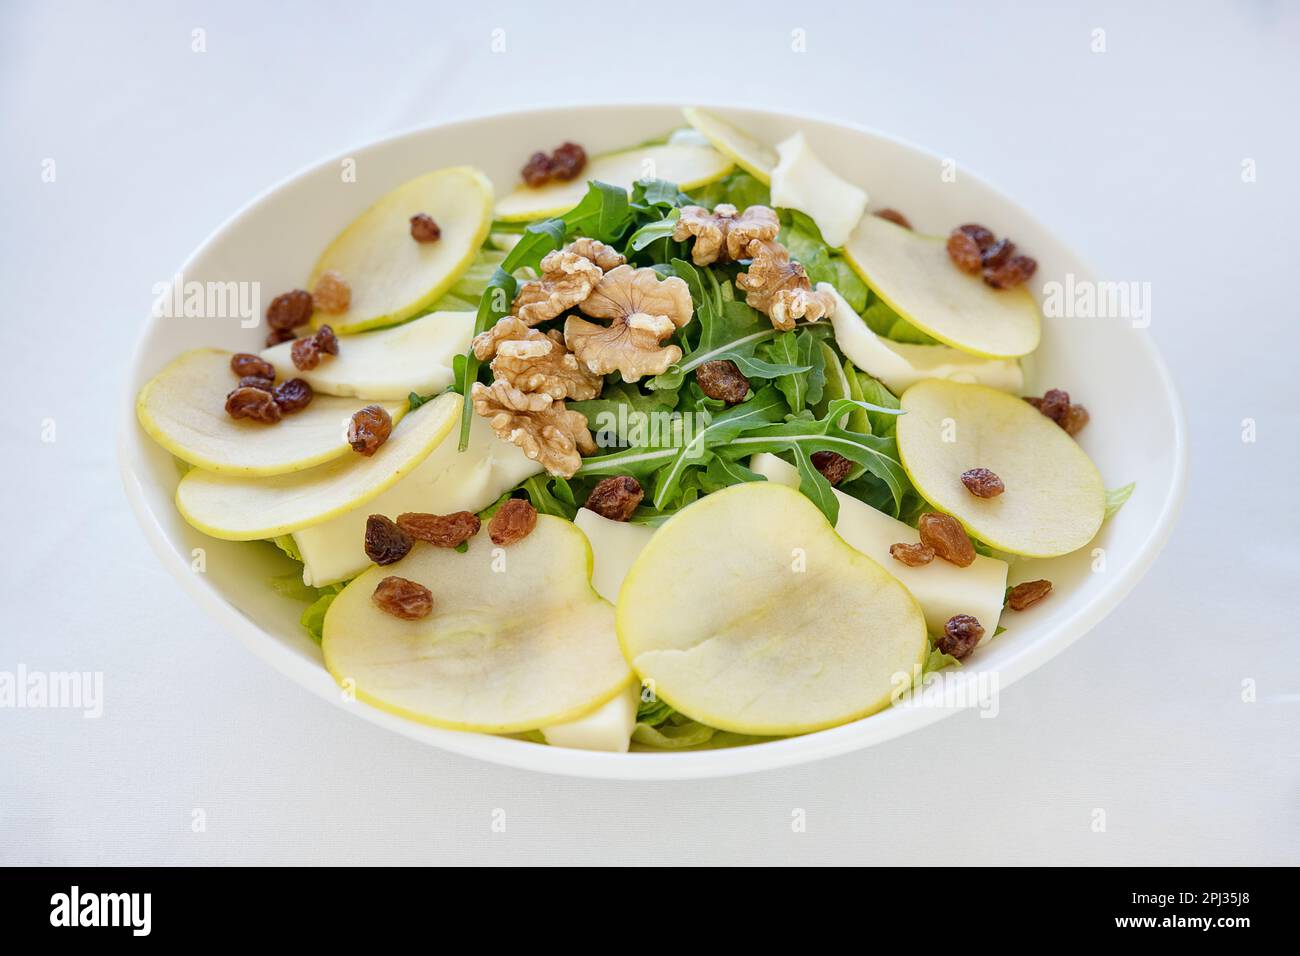 Delicious fresh salad combining flavors and textures with crisp juicy apples for a hint of tanginess, earthy walnuts for a crunch and rocket leaves Stock Photo